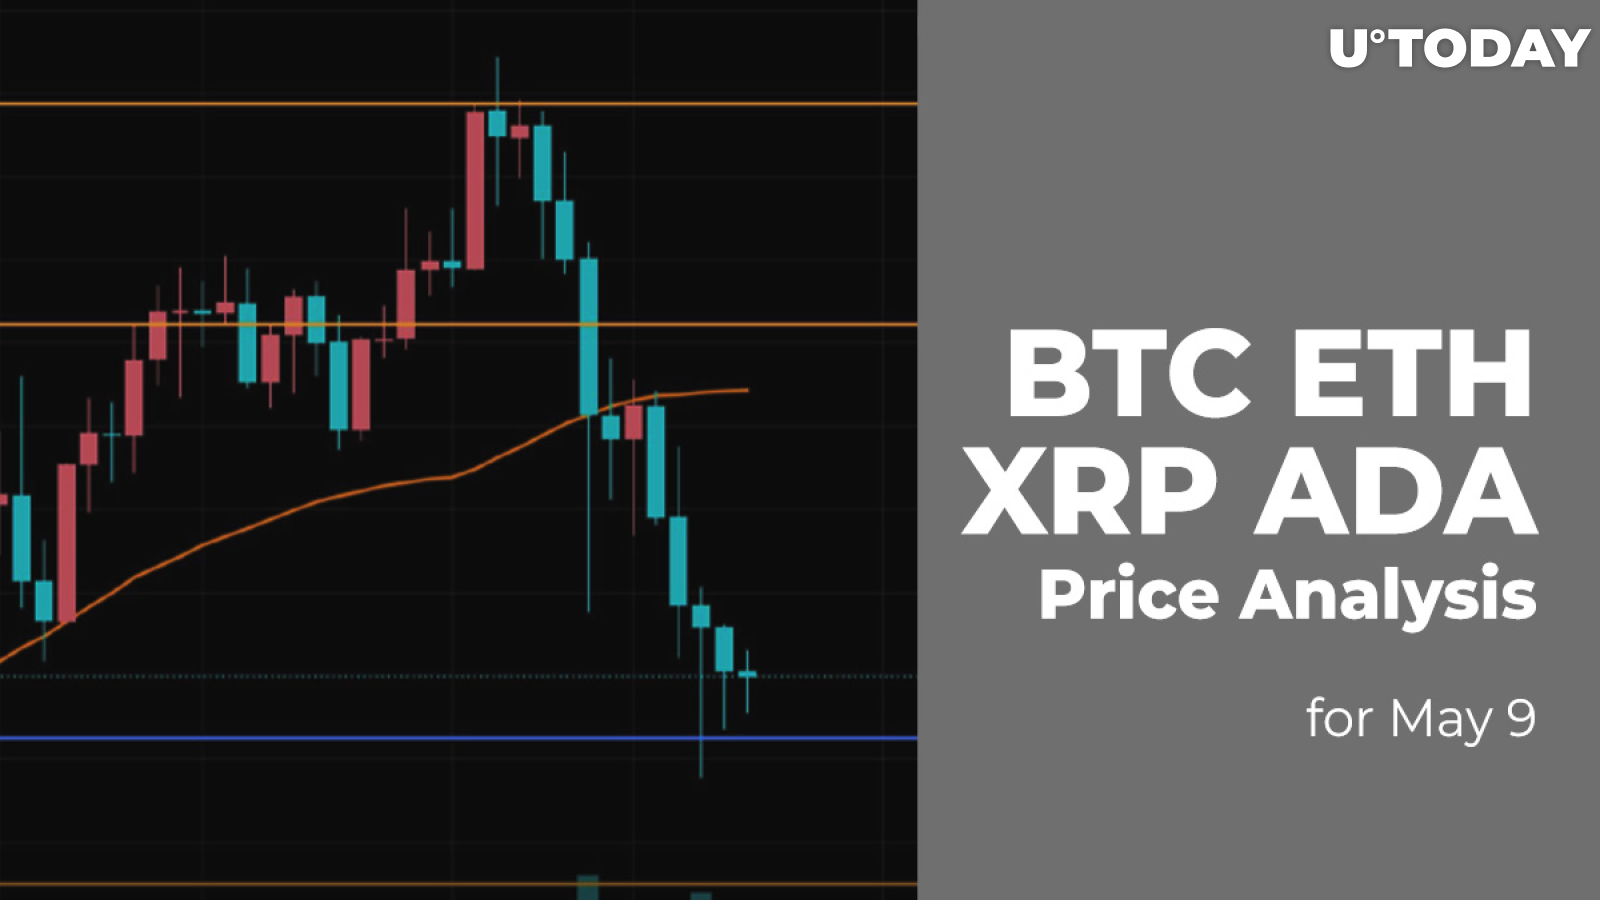 BTC, ETH, XRP and ADA Price Analysis for May 9